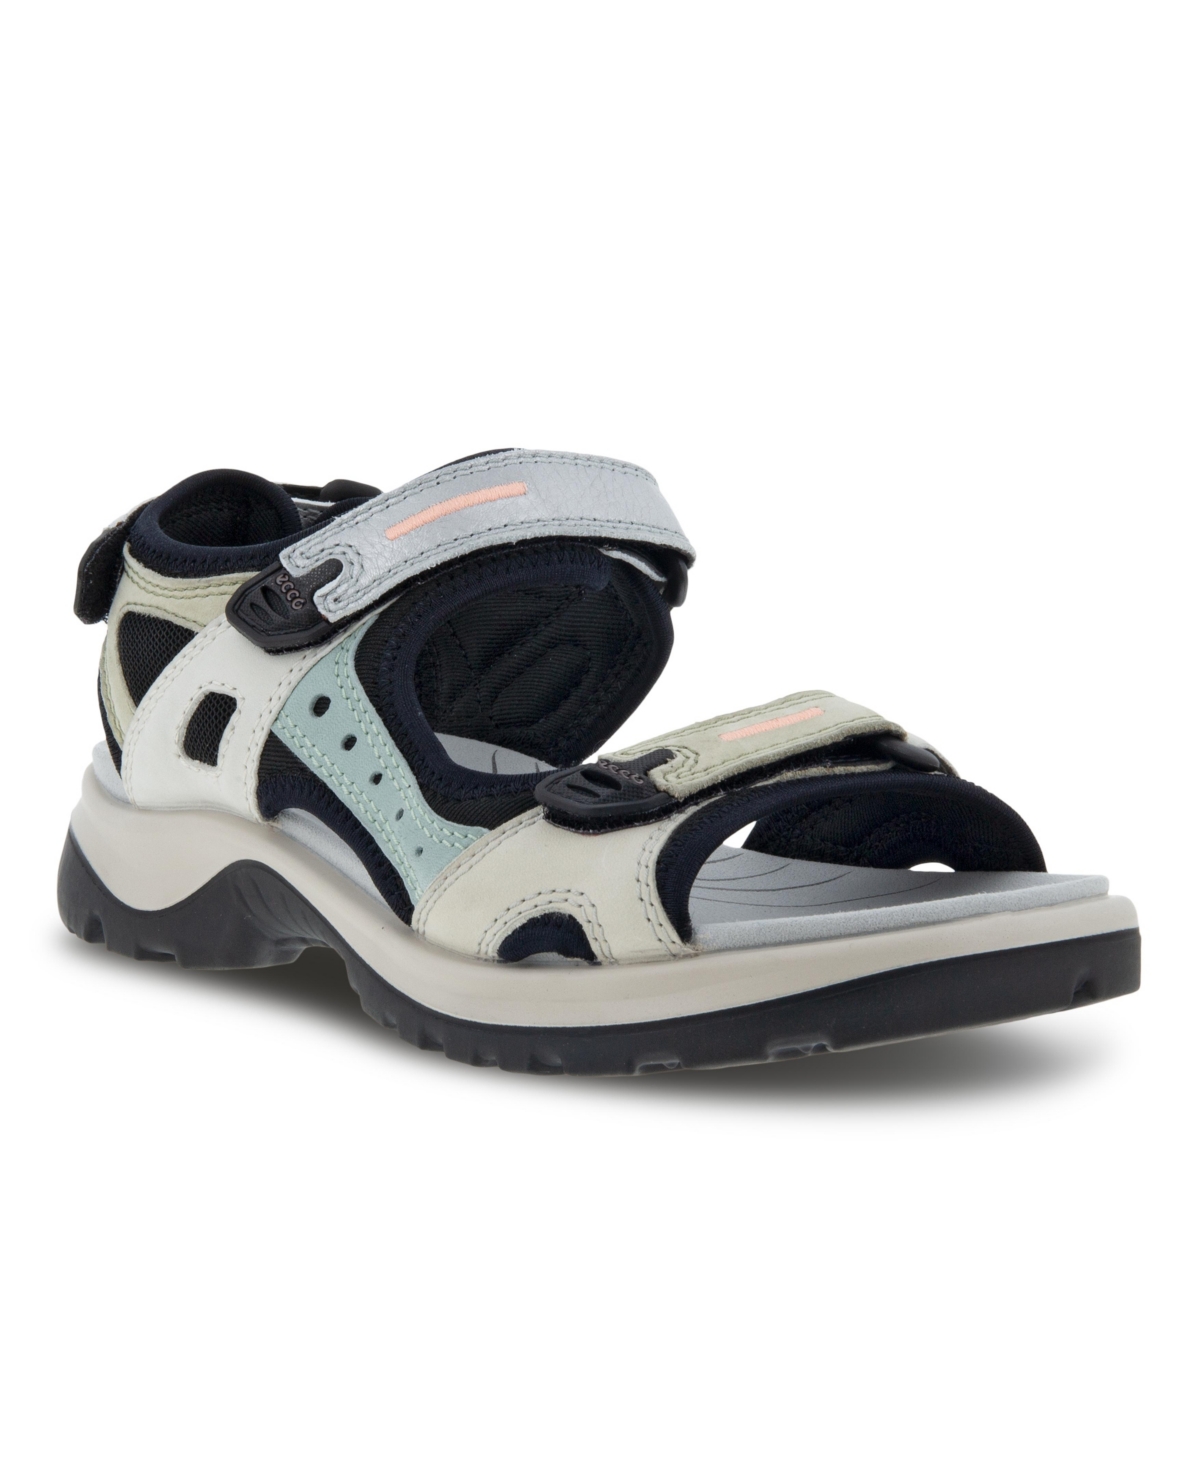 UPC 194891064231 product image for Ecco Women's Offroad Sandals Women's Shoes | upcitemdb.com